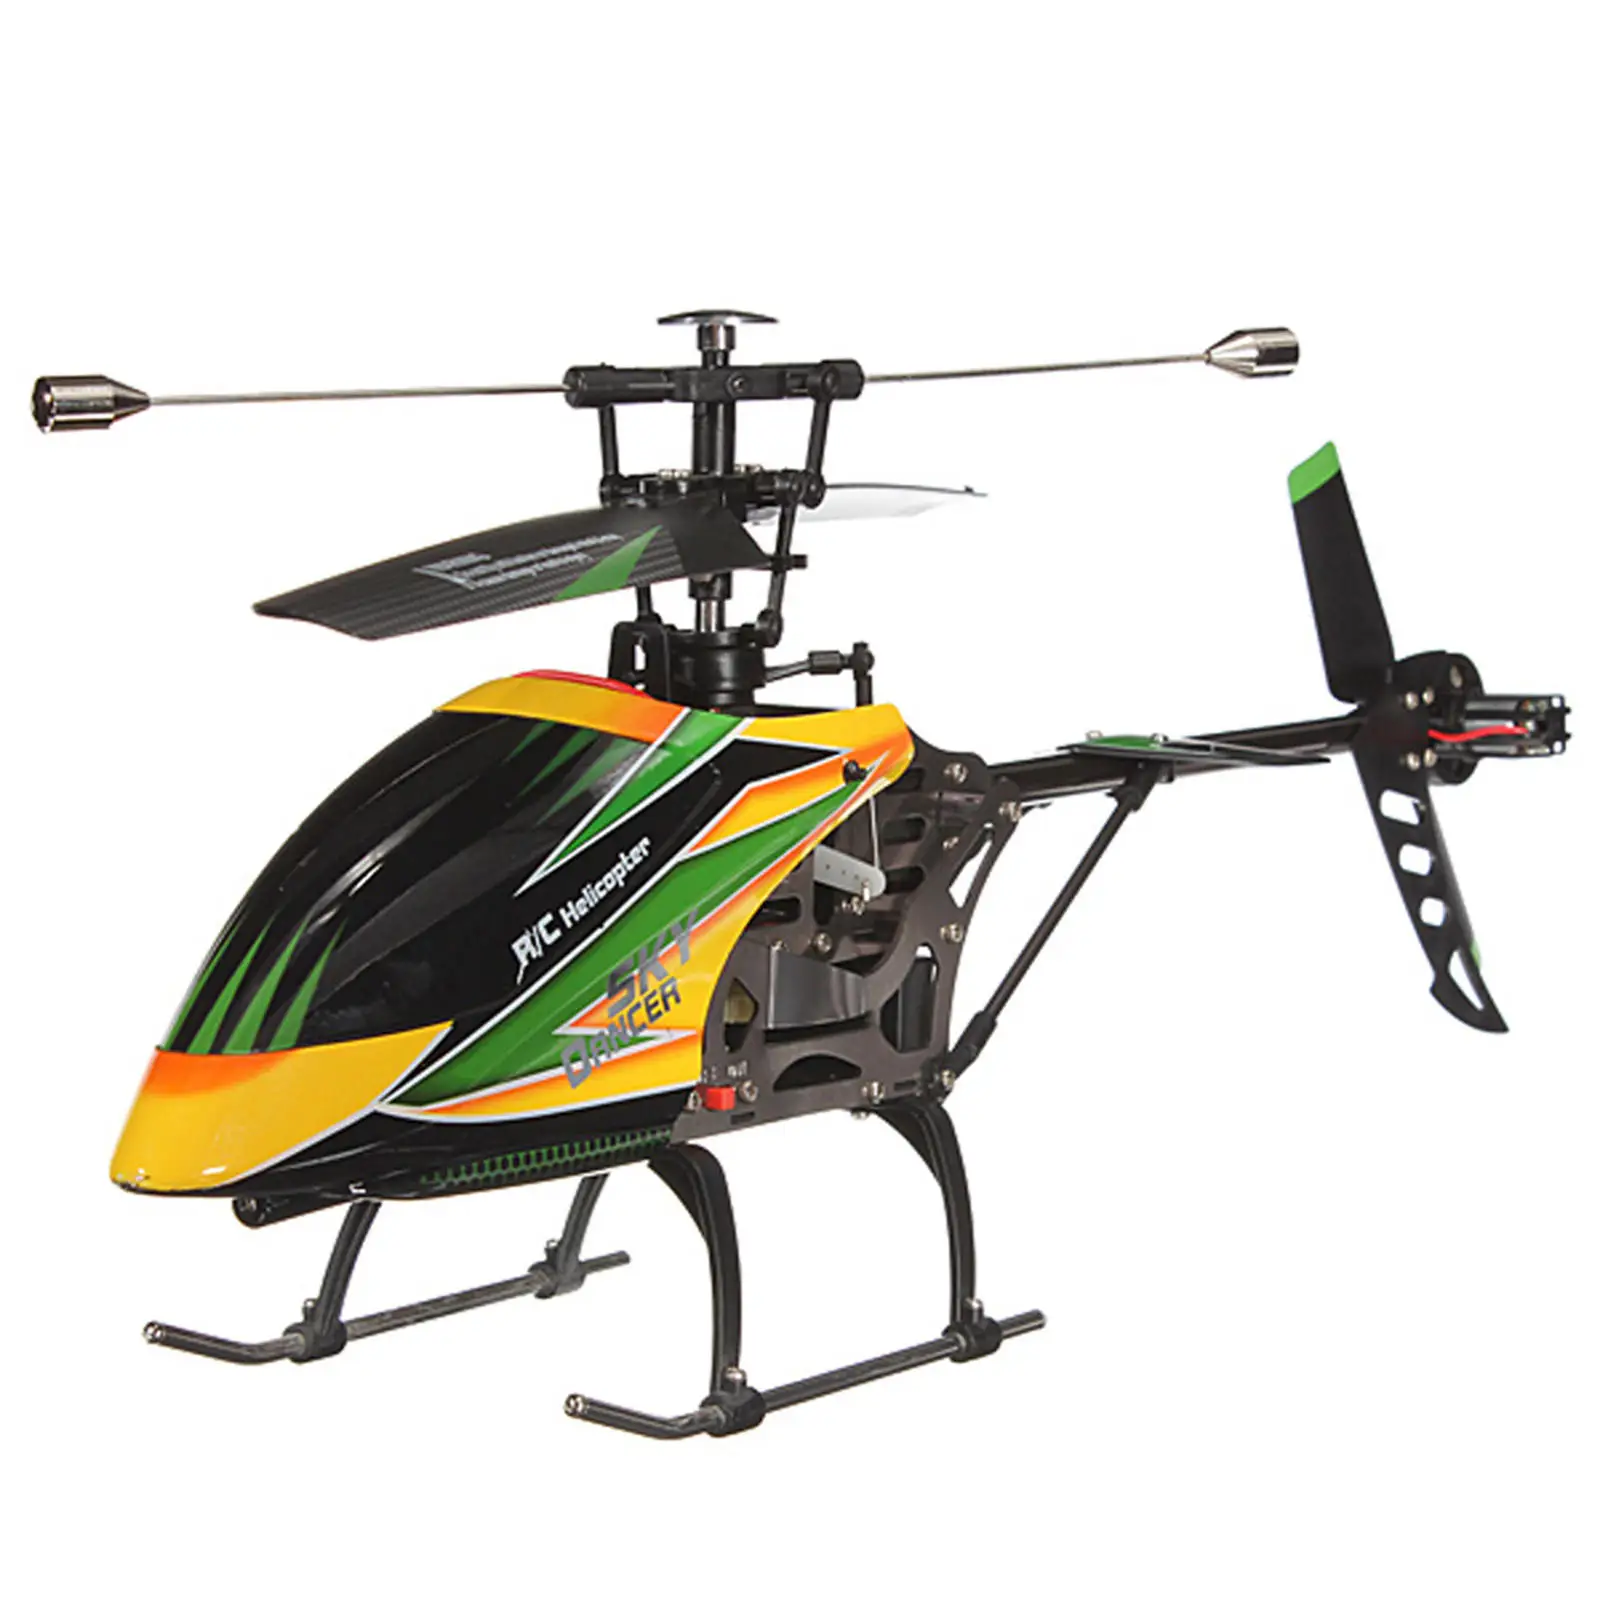 Yellow 2.4G Display 4CH RC Remote Control Helicopter RTF For WLtoys V912 Exquisitely Designed Durable for Boys Kids